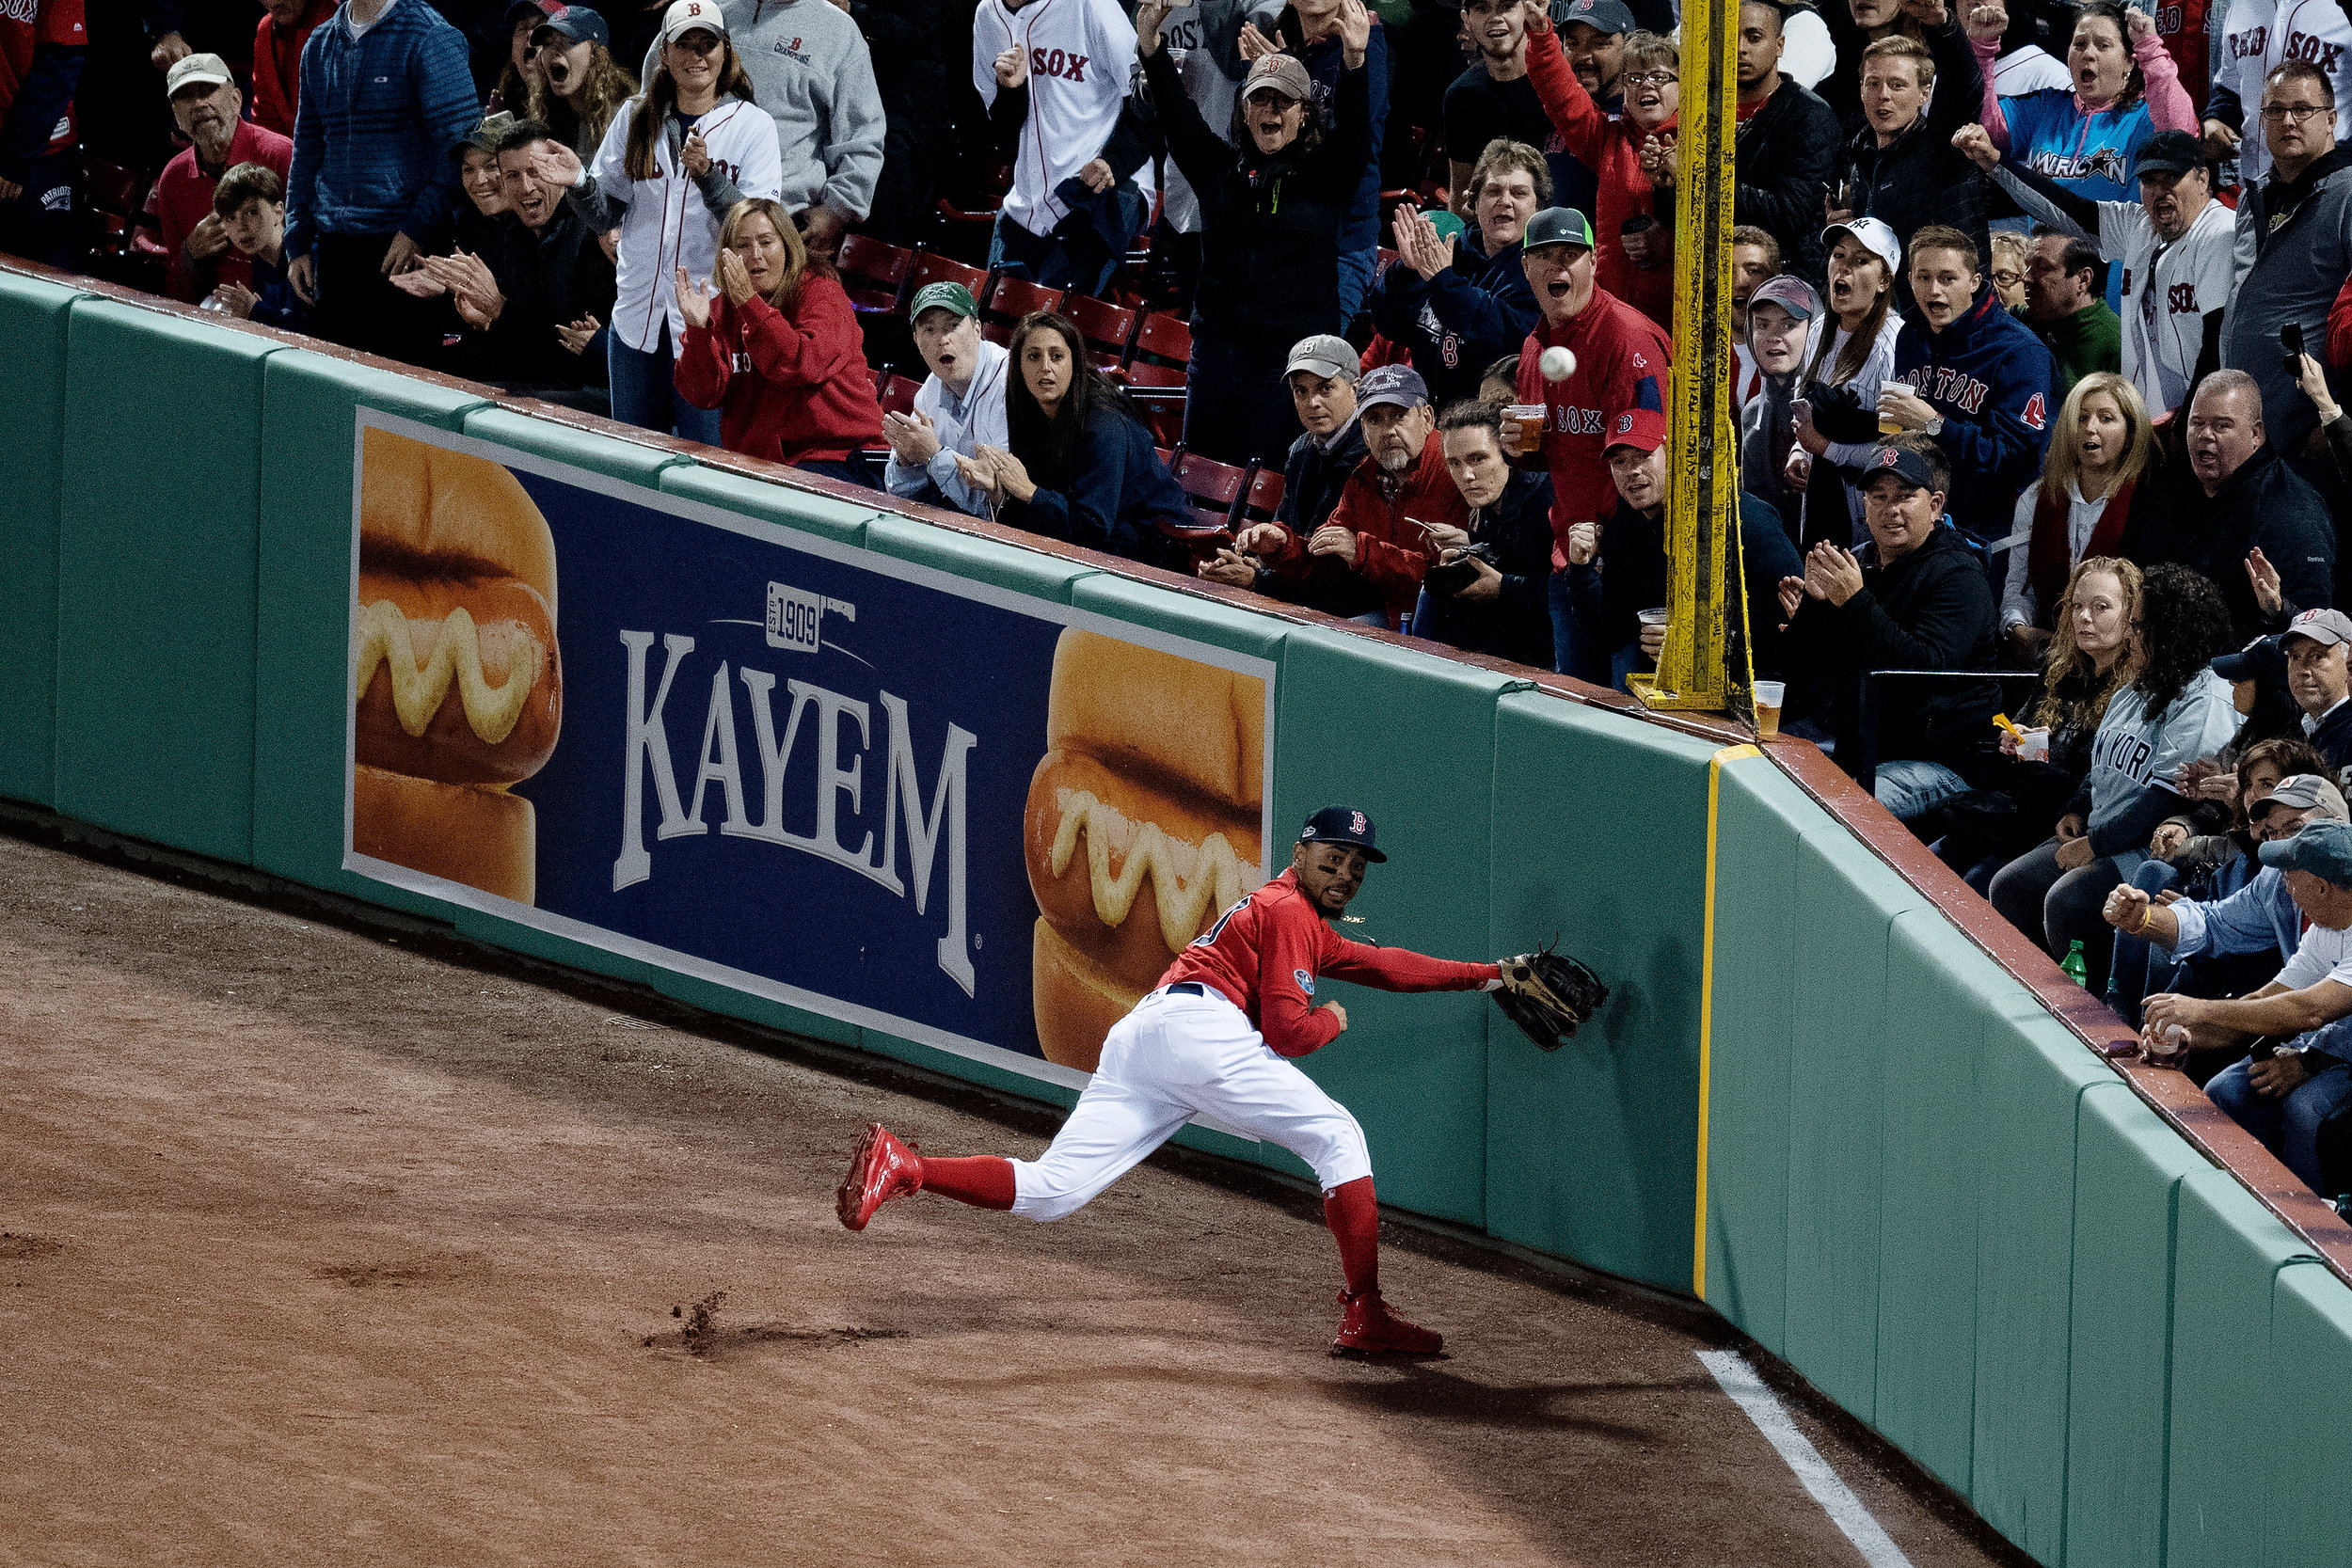  Boston Red Sox outfielder Mookie Betts looks to catch the ball in right field during Game 1 of the ALDS against the New York Yankees at Fenway Park in Boston, Massachusetts, on Friday, October 5, 2018. 